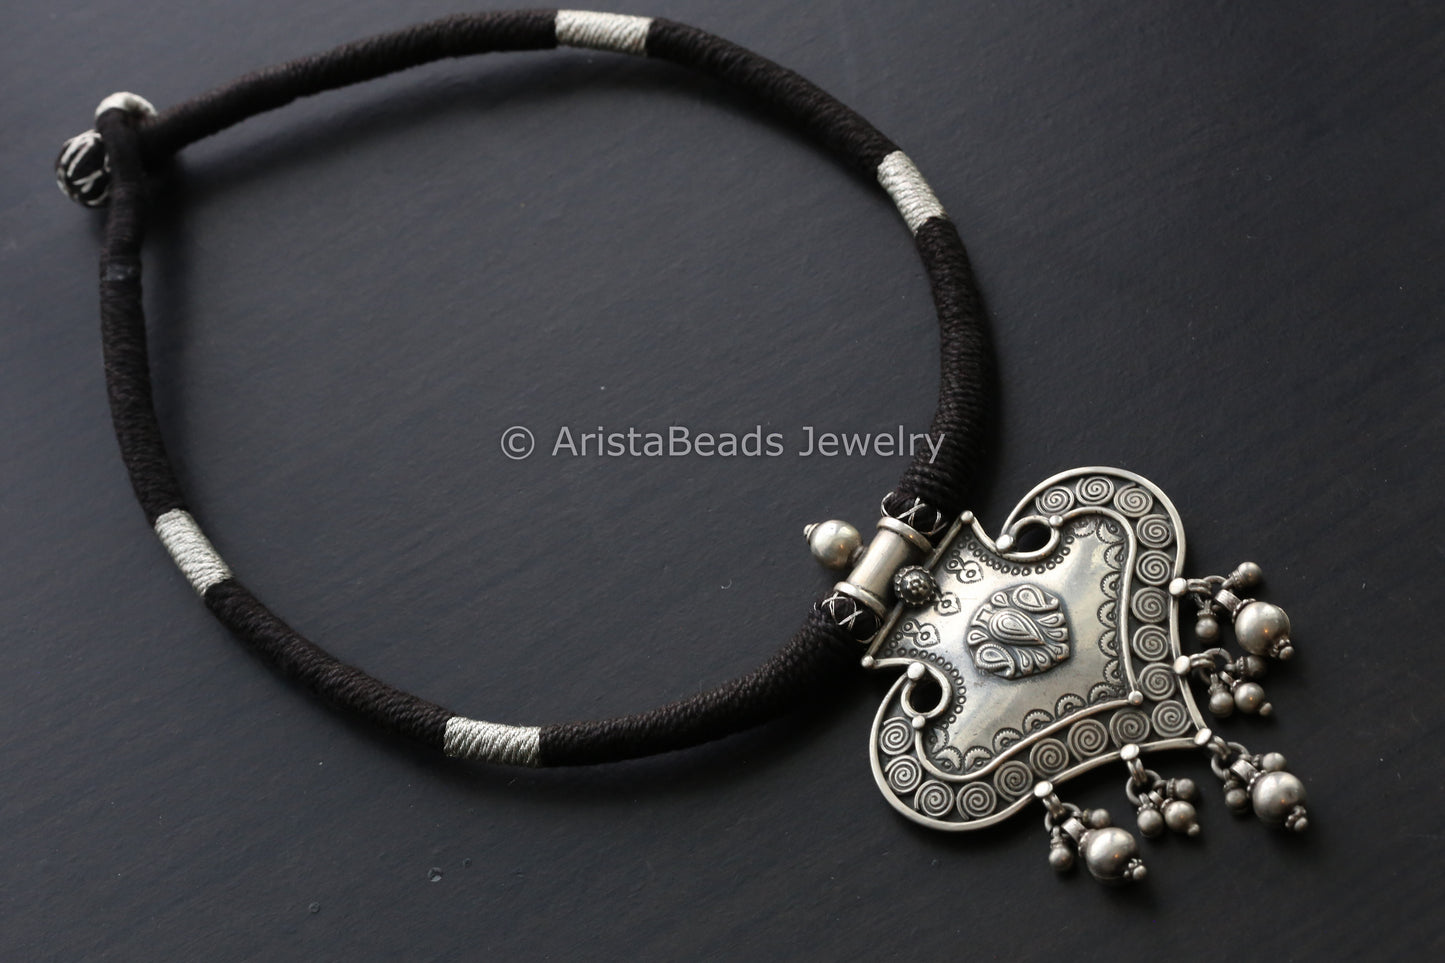 925 Sterling Silver Necklace in Black Silver Thread